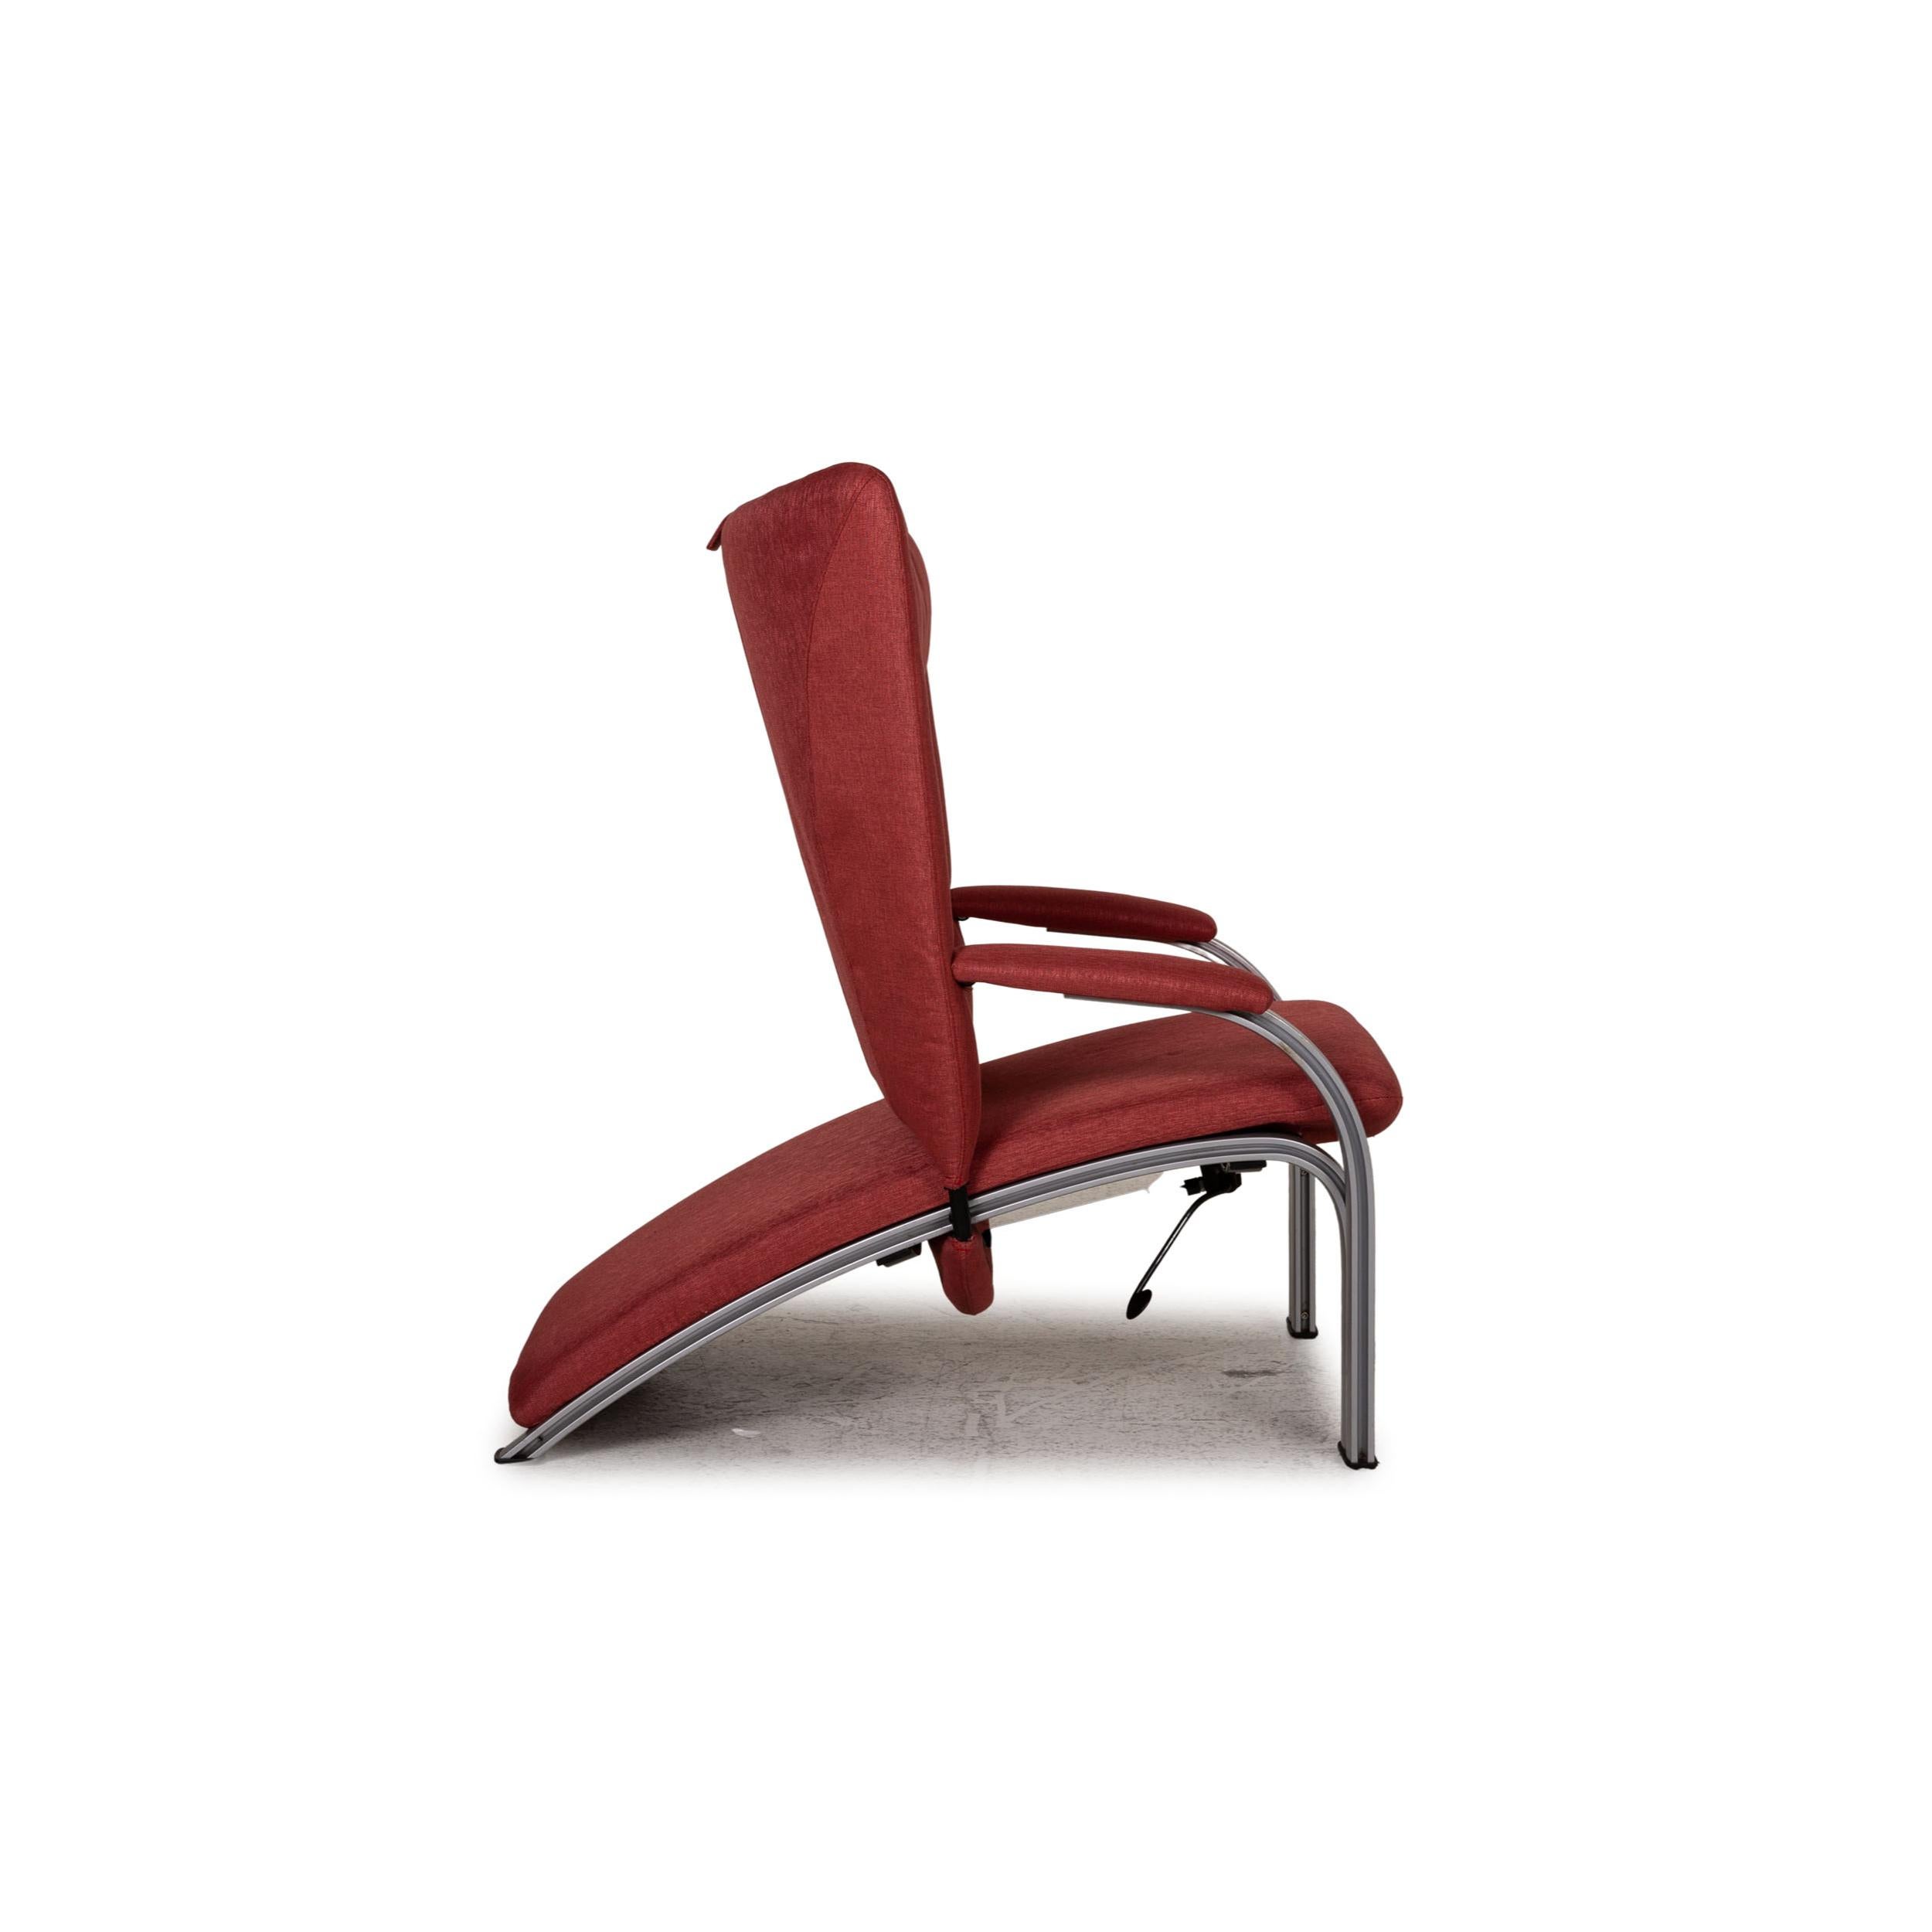 WK Wohnen Spot 698 Armchair Fabric Red Function Relaxation Function In Good Condition For Sale In Cologne, DE